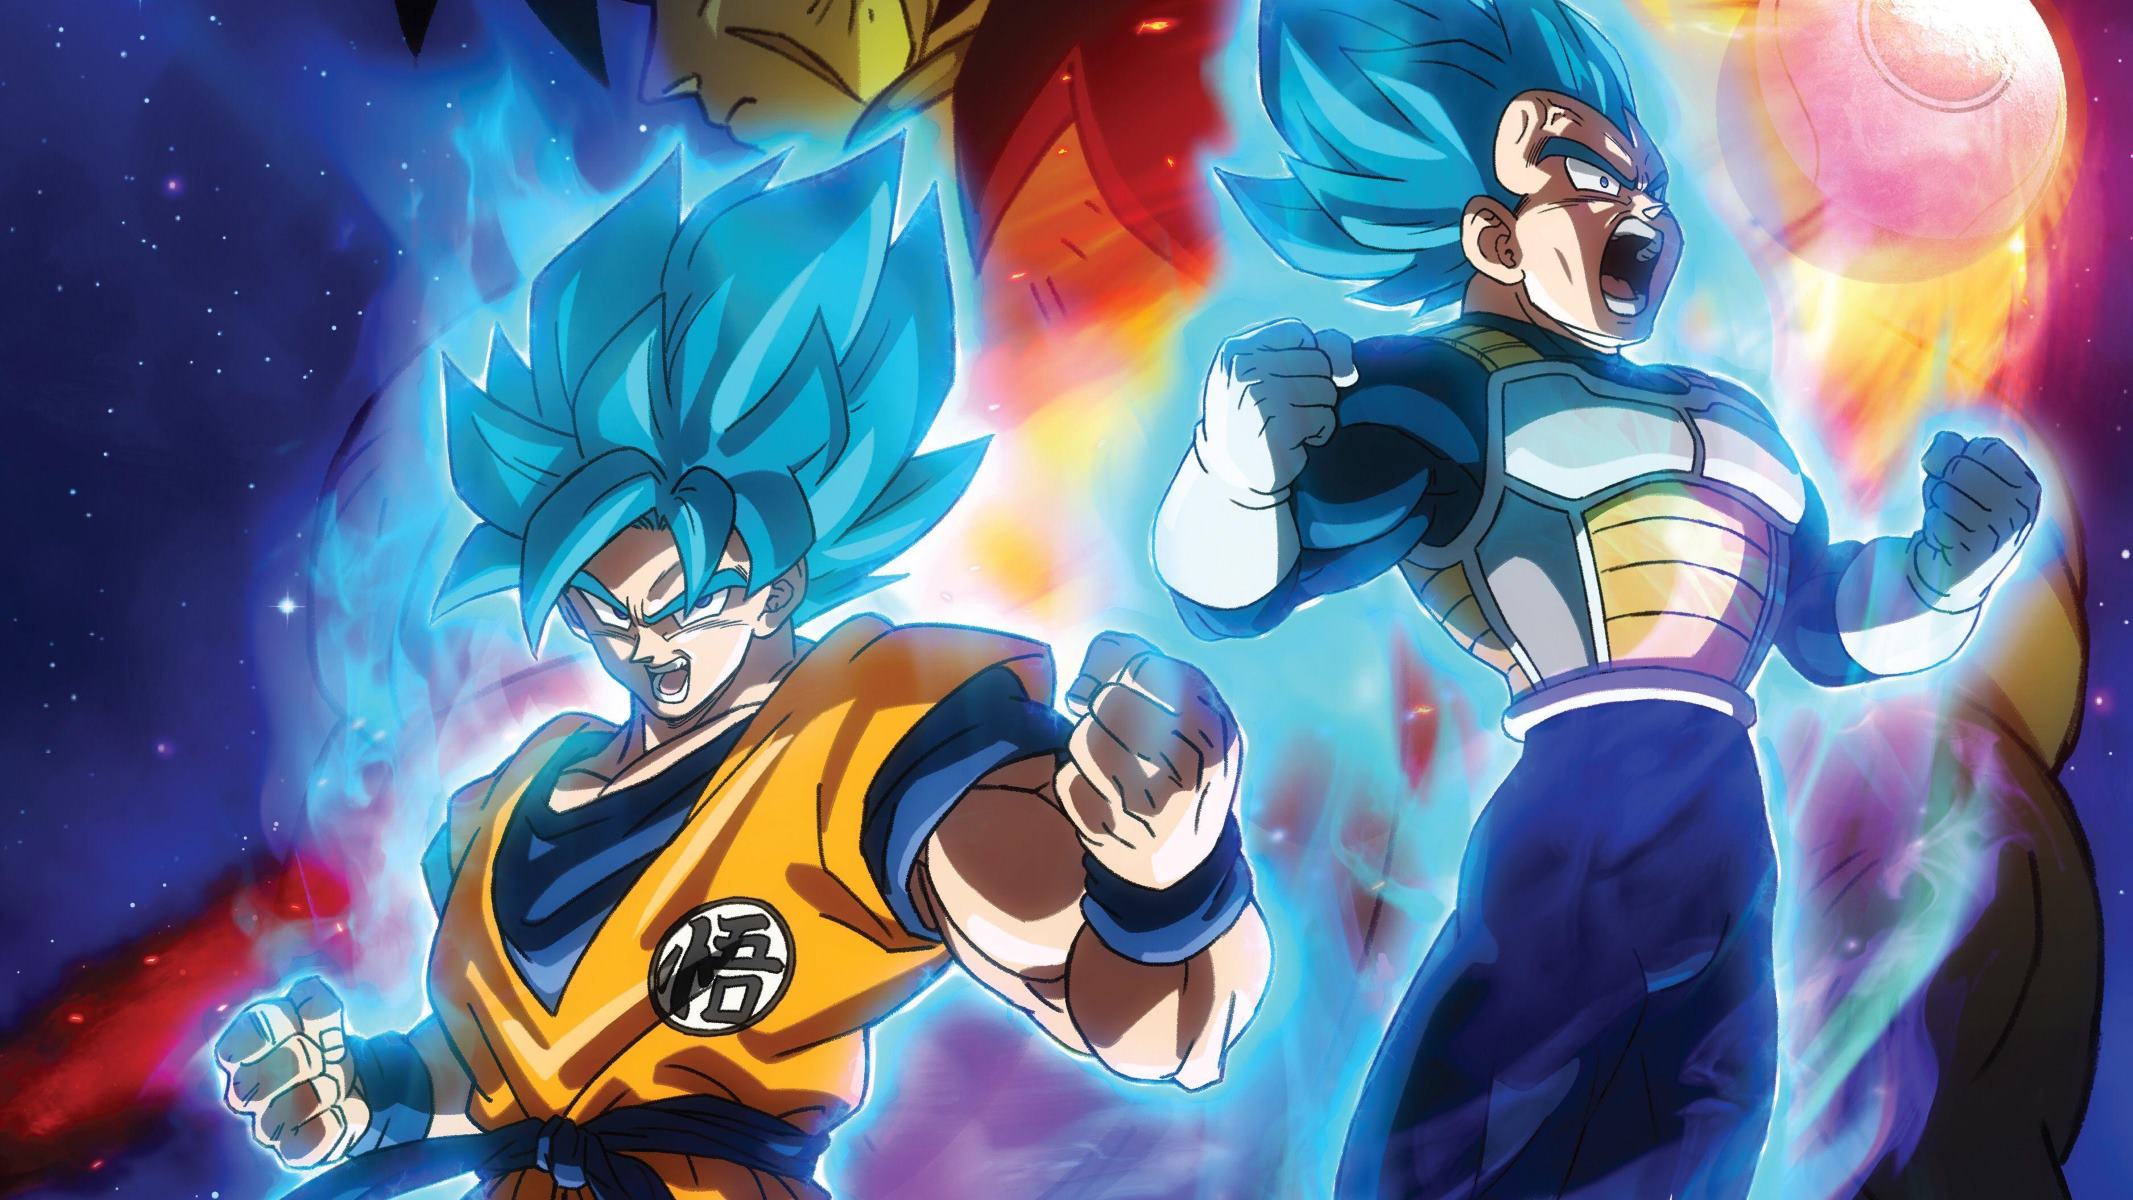 Exciting News: Dragon Ball Super Season 3 English Dub Release Date Revealed!